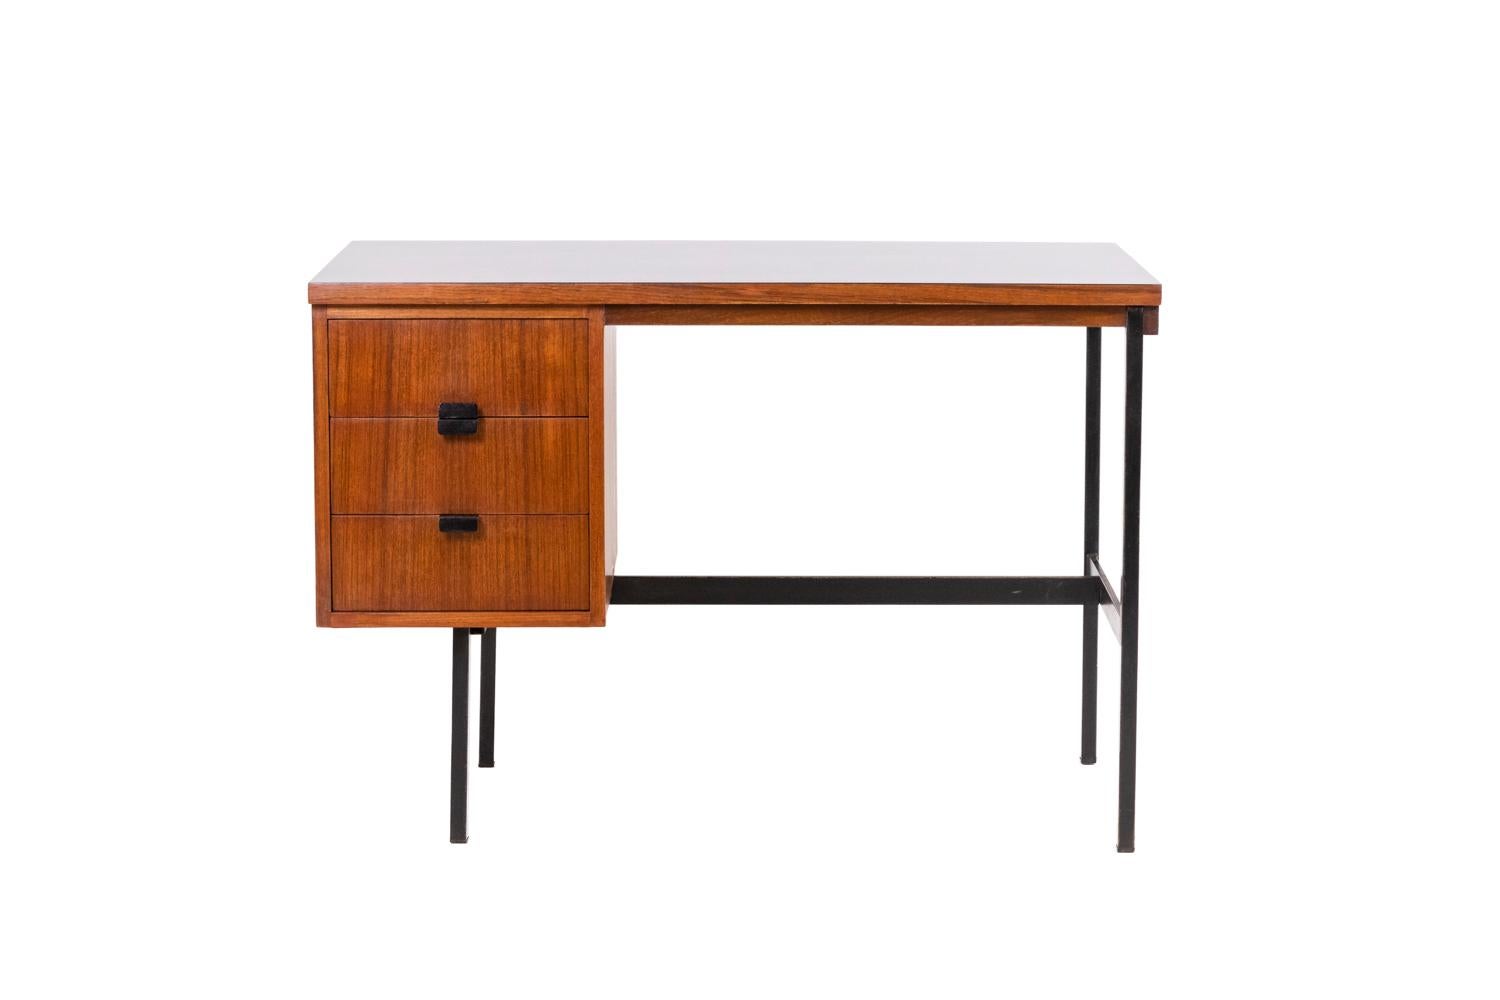 Desk in mahogany veneer, “Multitable” model. Box with three drawers in front, two niches in the back. Straight base in black lacquered steel joined by a spacer. Tray in black laminate. Rectangular handles in black lacquered steel.

French work